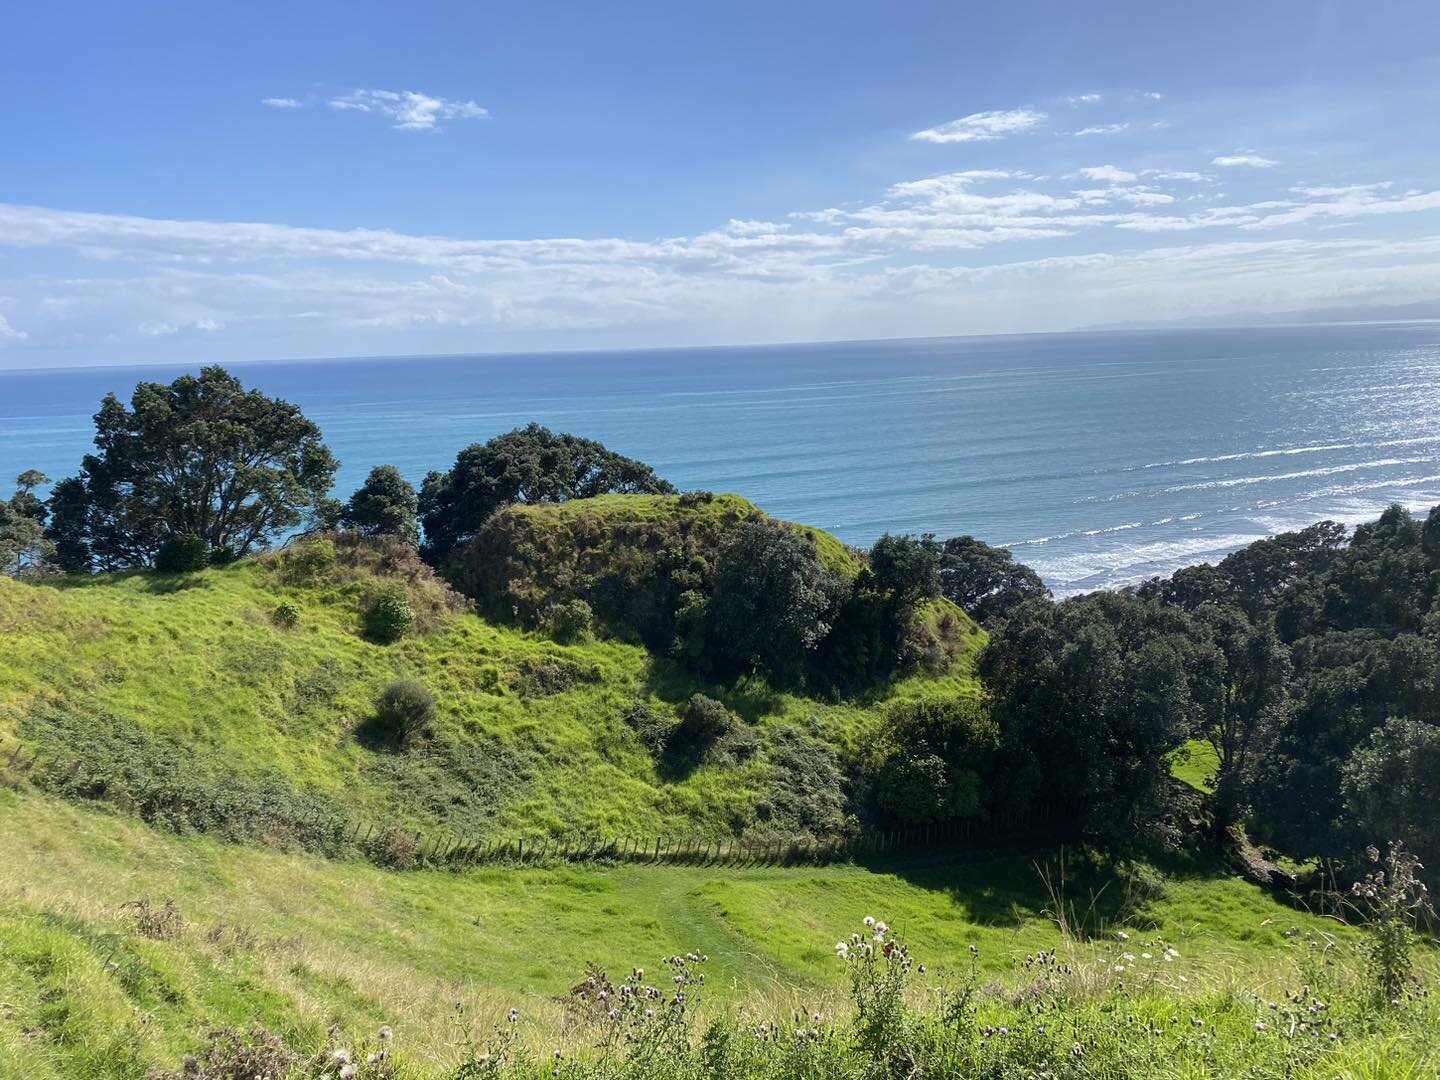 Just a Bay of Plenty archaeology highlight reel from last week 😏🤩 
All accessible to the public too so get out there! Featured: Onekawa Te Mawhai Regional Park, Tauwhare Pā Scenic Reserve and Pāpāmoa Hills Cultural Heritage Regional Park ✨